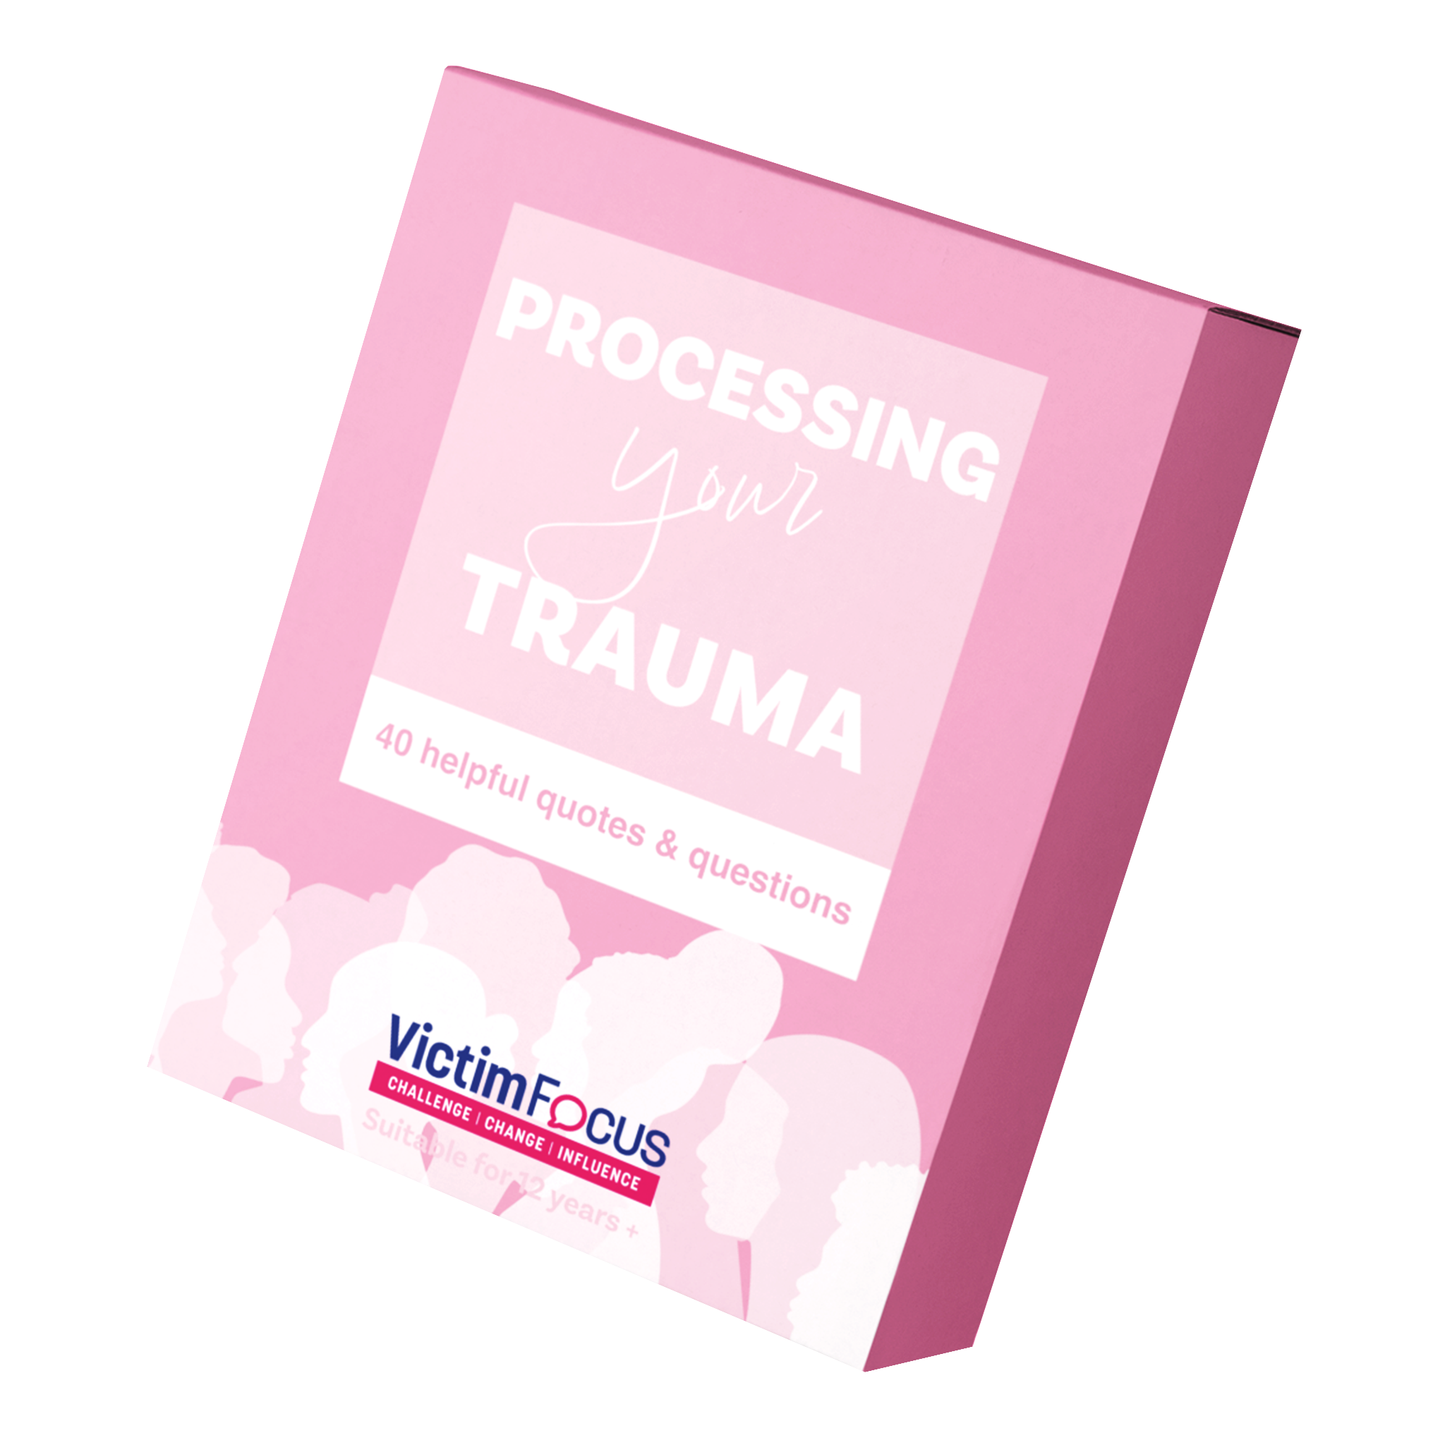 Processing your trauma: 40 helpful quotes and questions